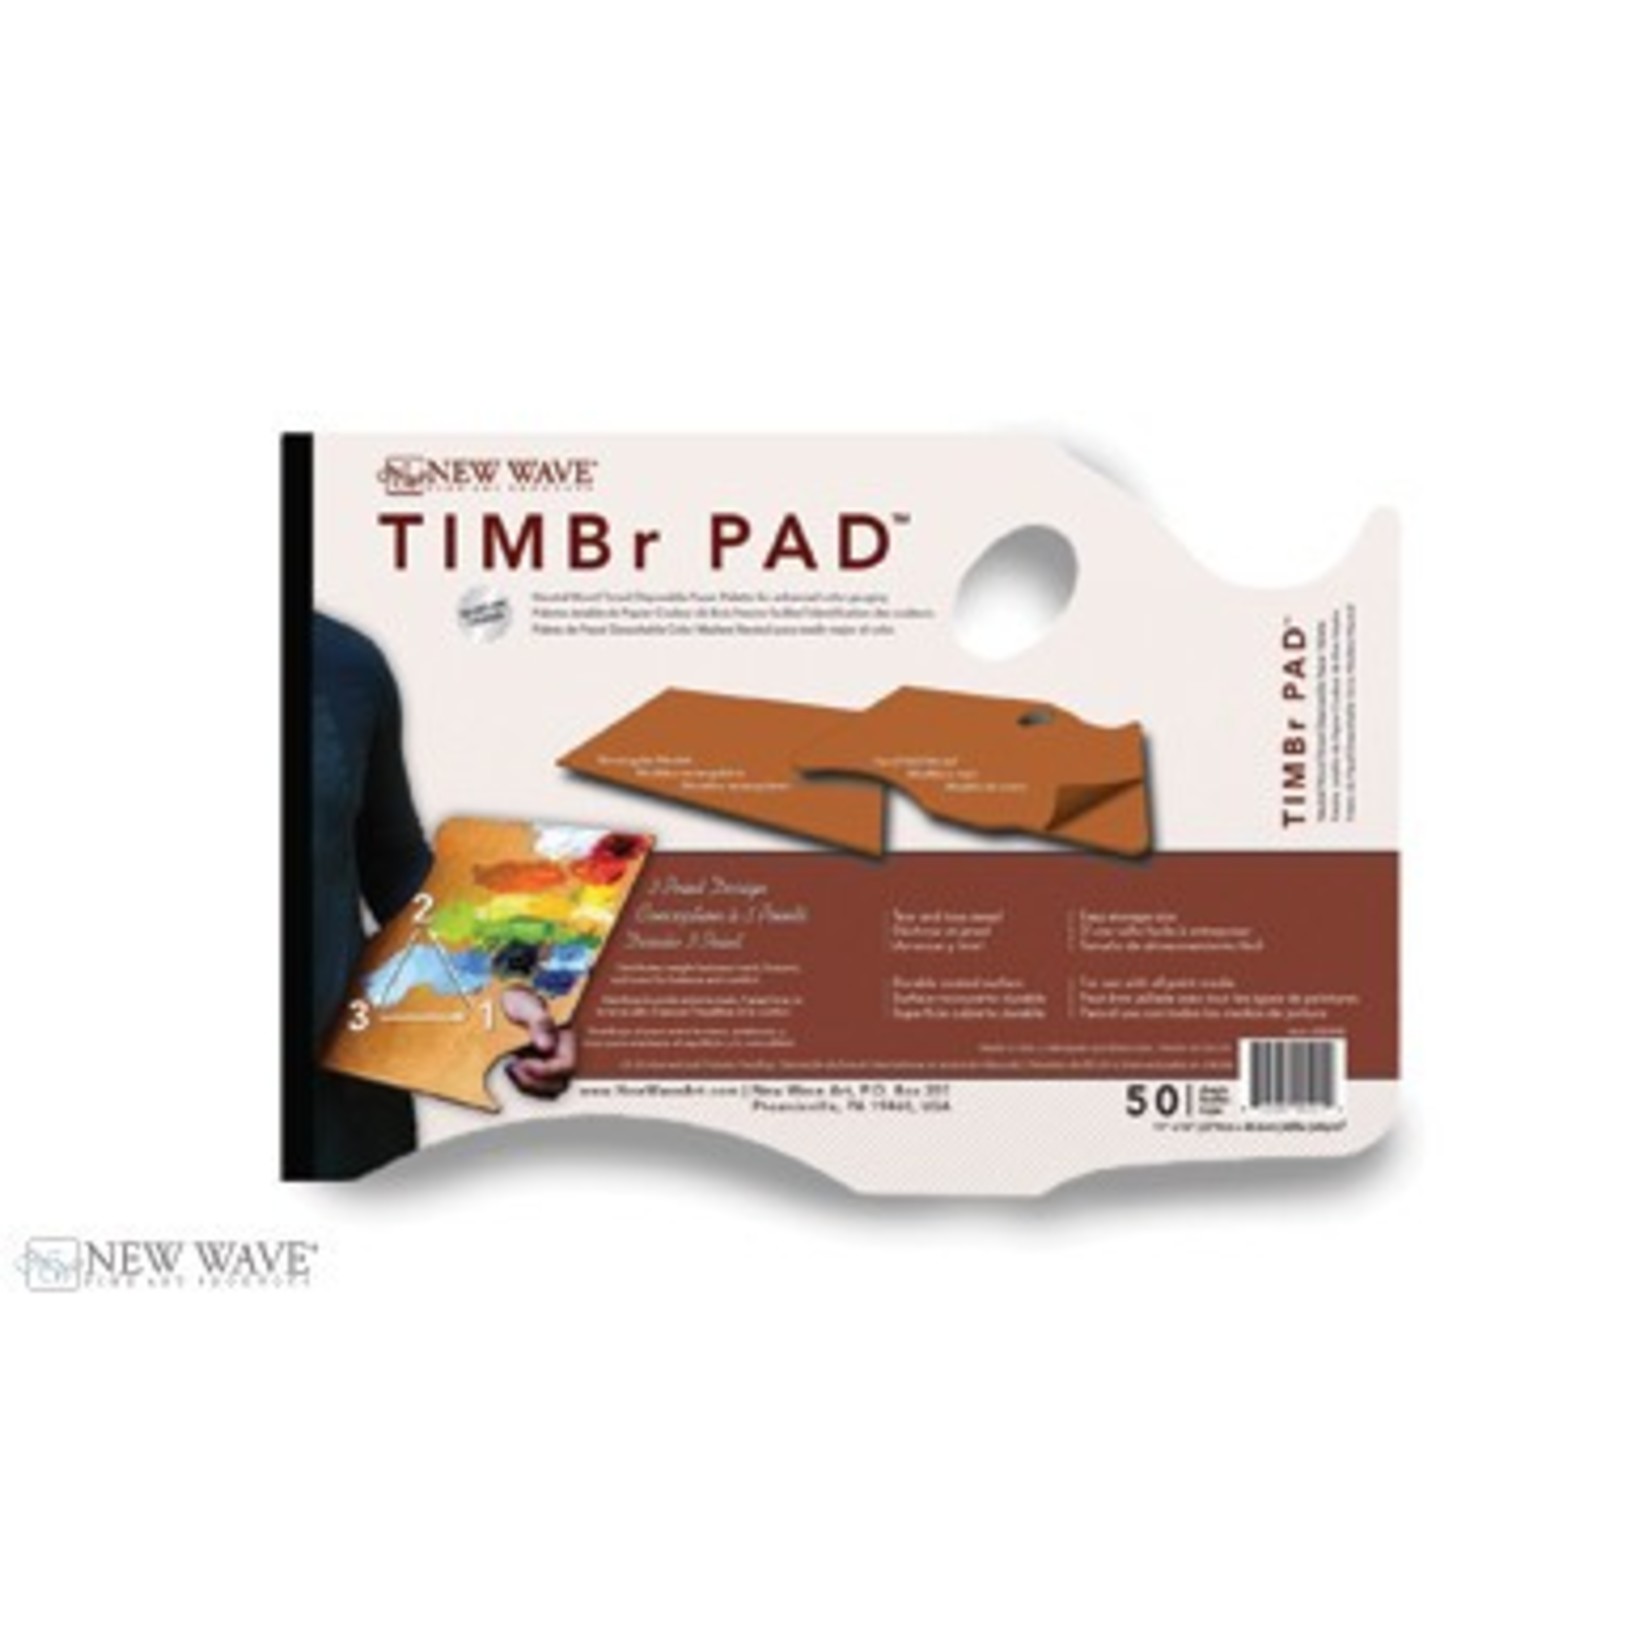 NEW WAVE ART NEW WAVE ART TIMBR PAD 11X16 HAND HELD MODEL